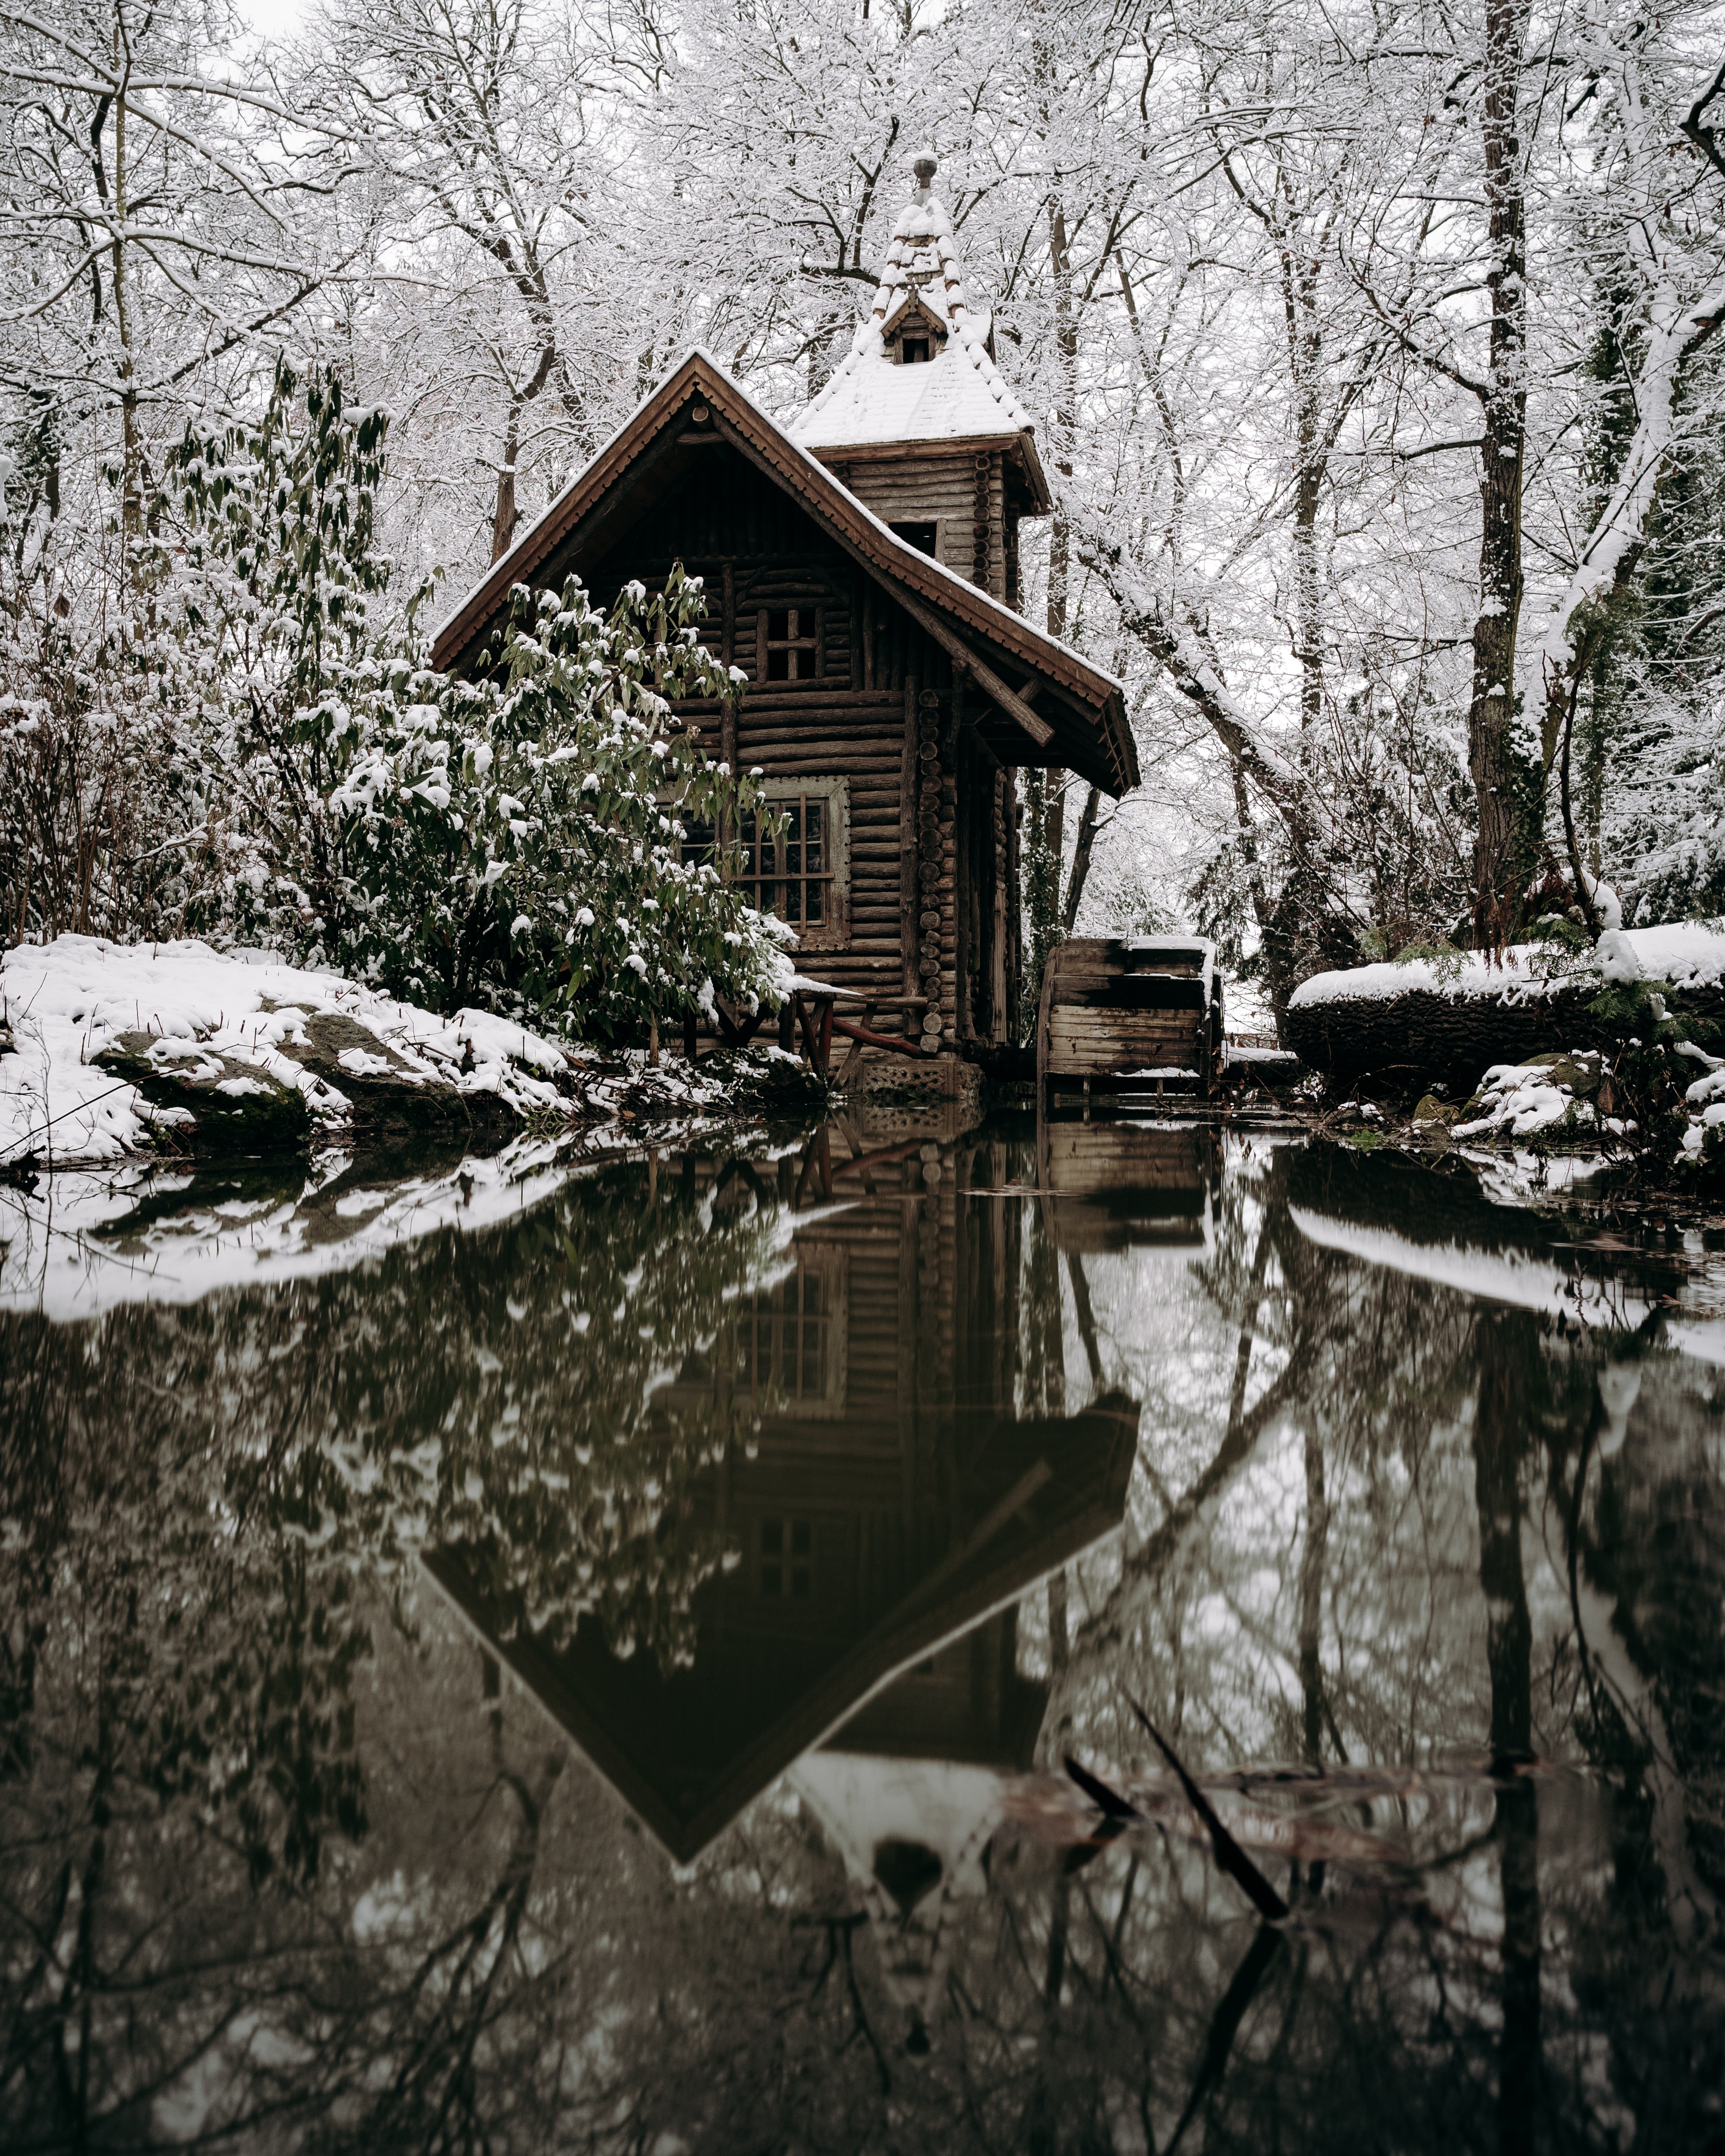 winter, snow, nature, rivers, small house, lodge cellphone